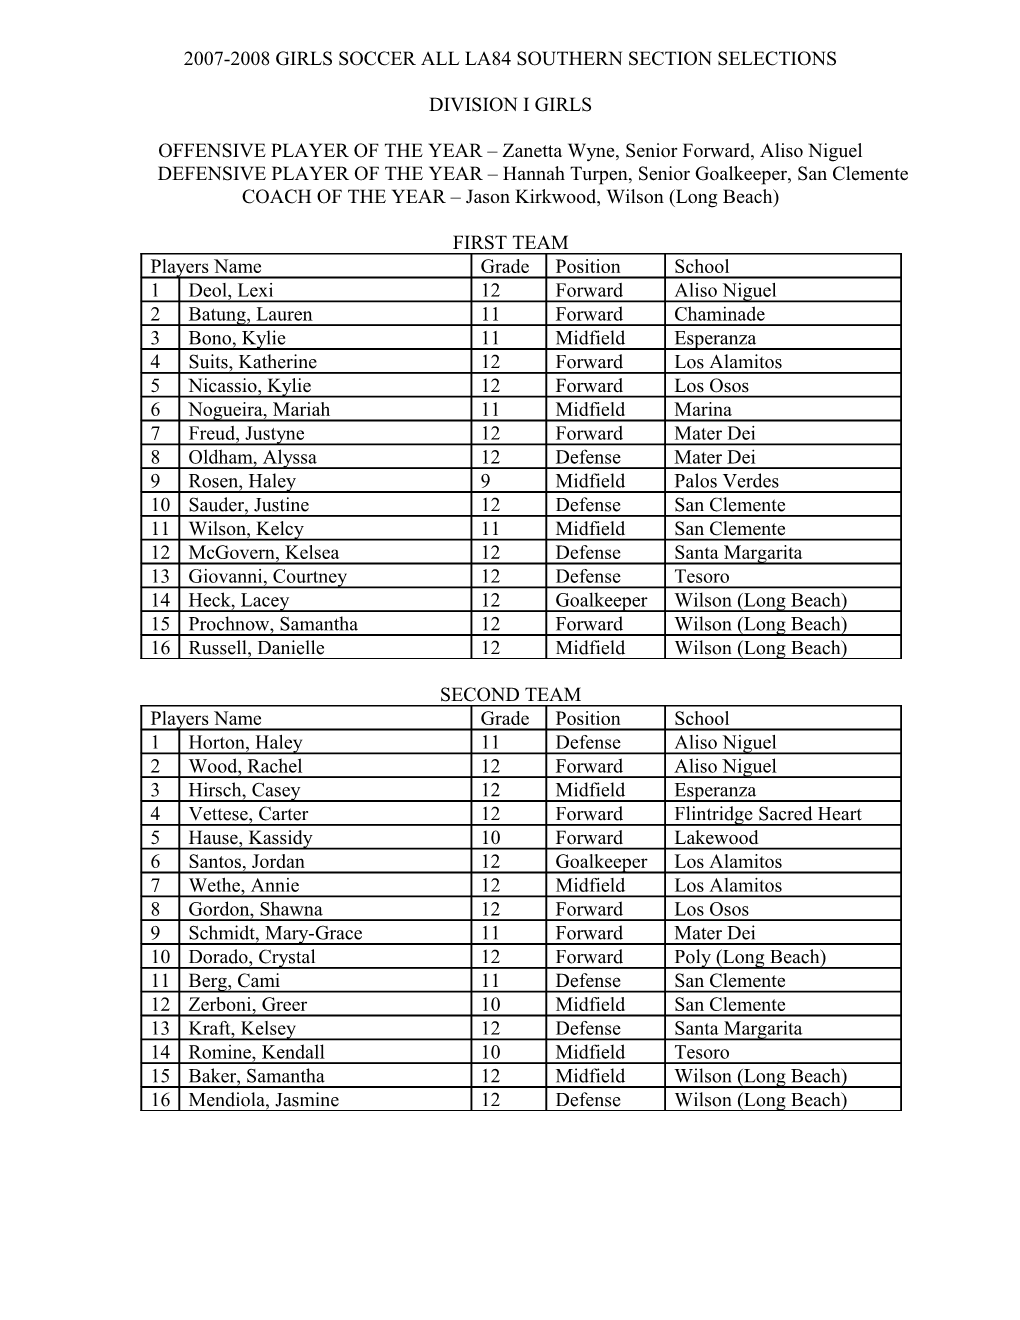 2005-2006 Girls Soccer All Cif Southern Section Selections